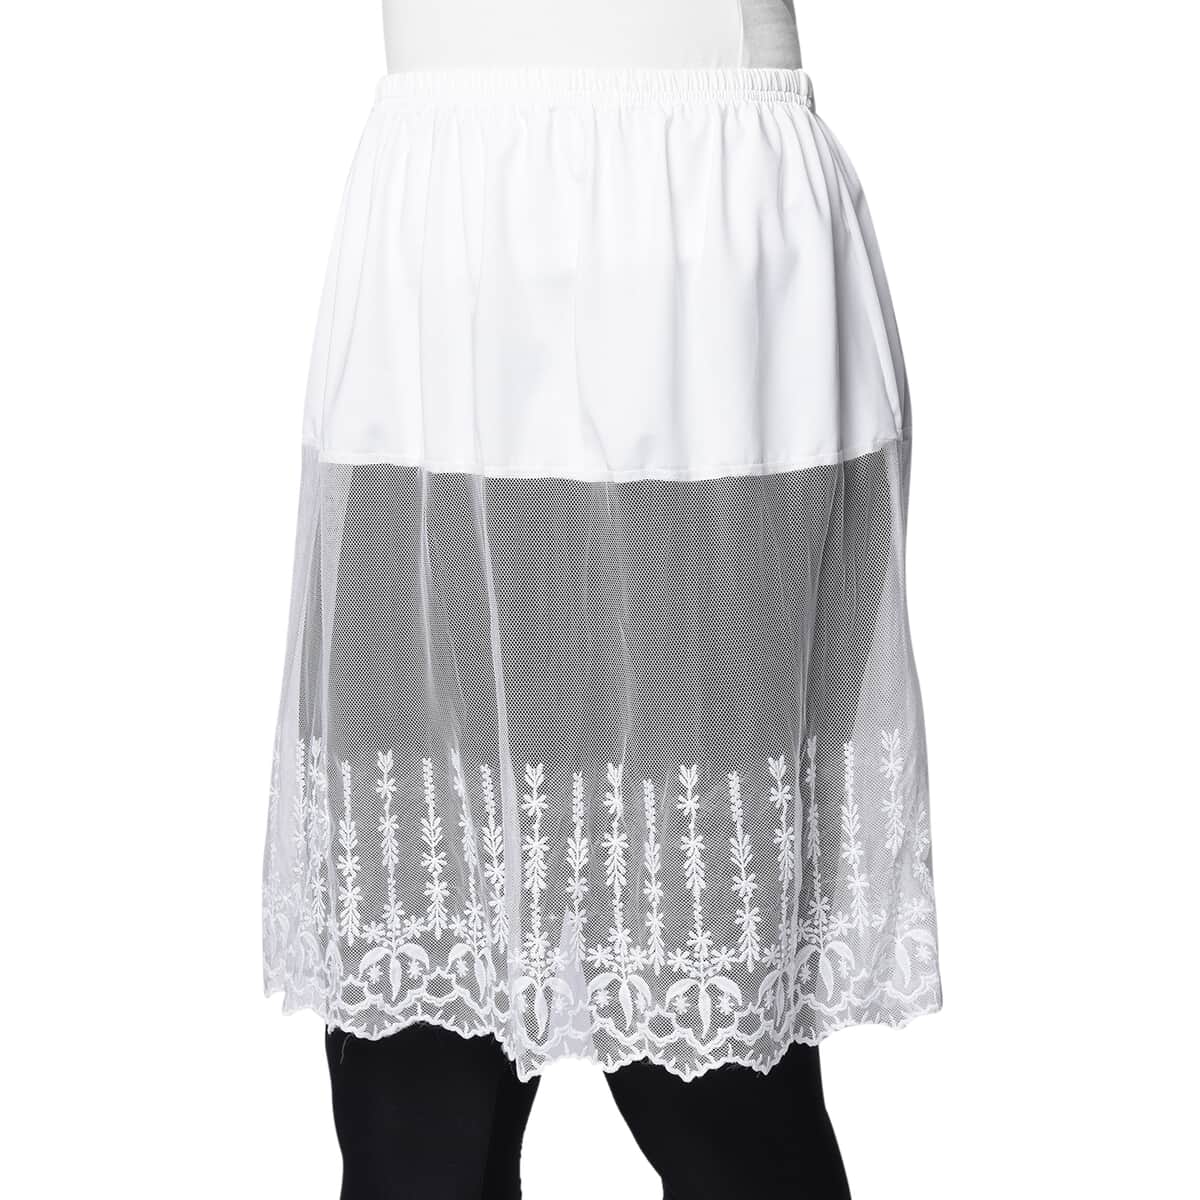 White Lace Skirt Extender with Elastic Waistband (Polyester, S/M) image number 1